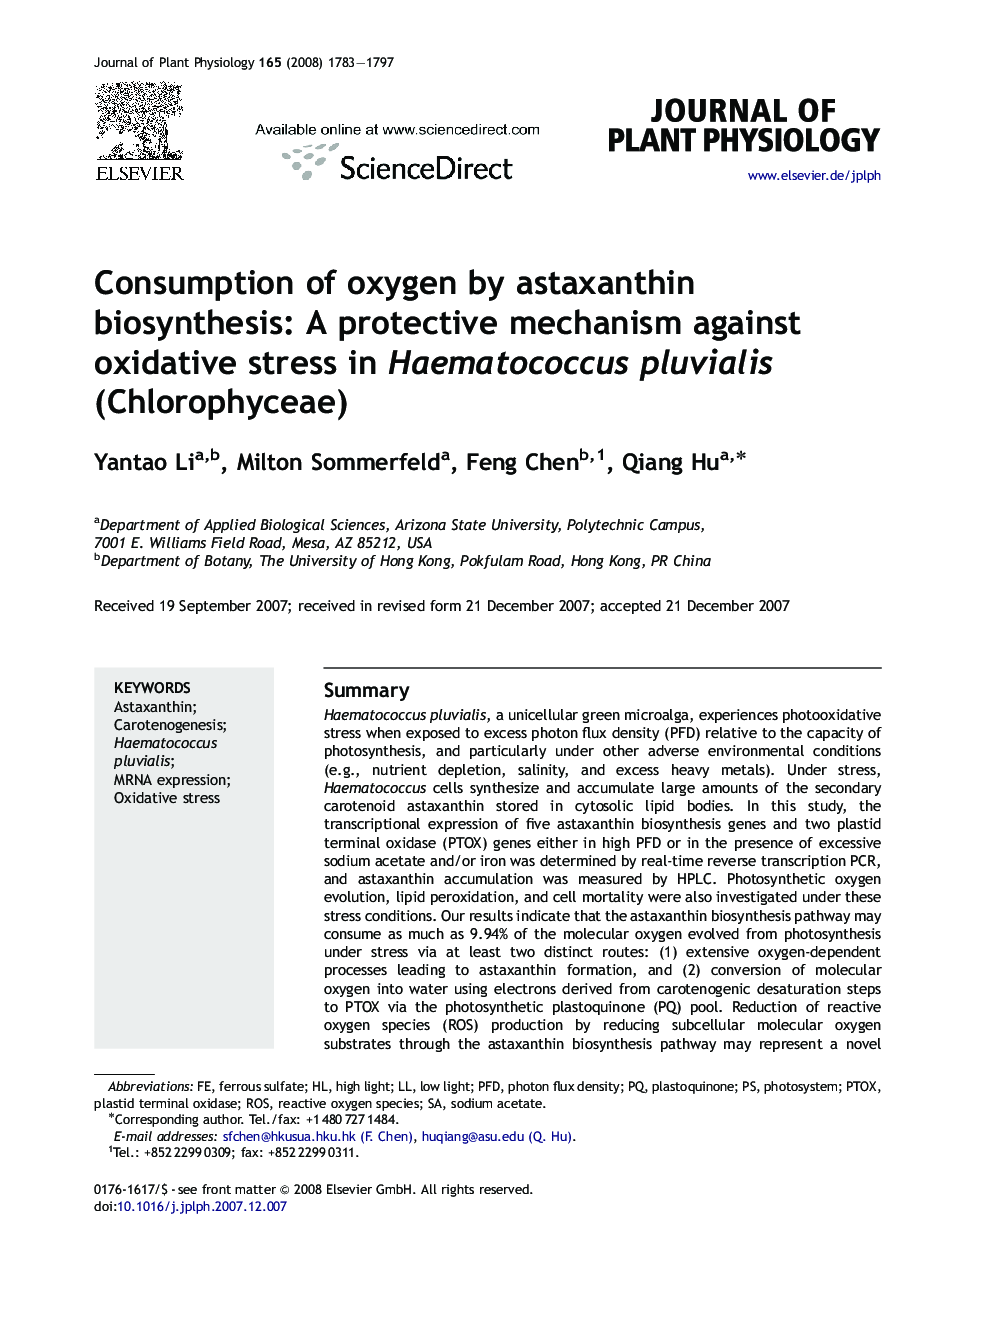 Consumption of oxygen by astaxanthin biosynthesis: A protective mechanism against oxidative stress in Haematococcus pluvialis (Chlorophyceae)